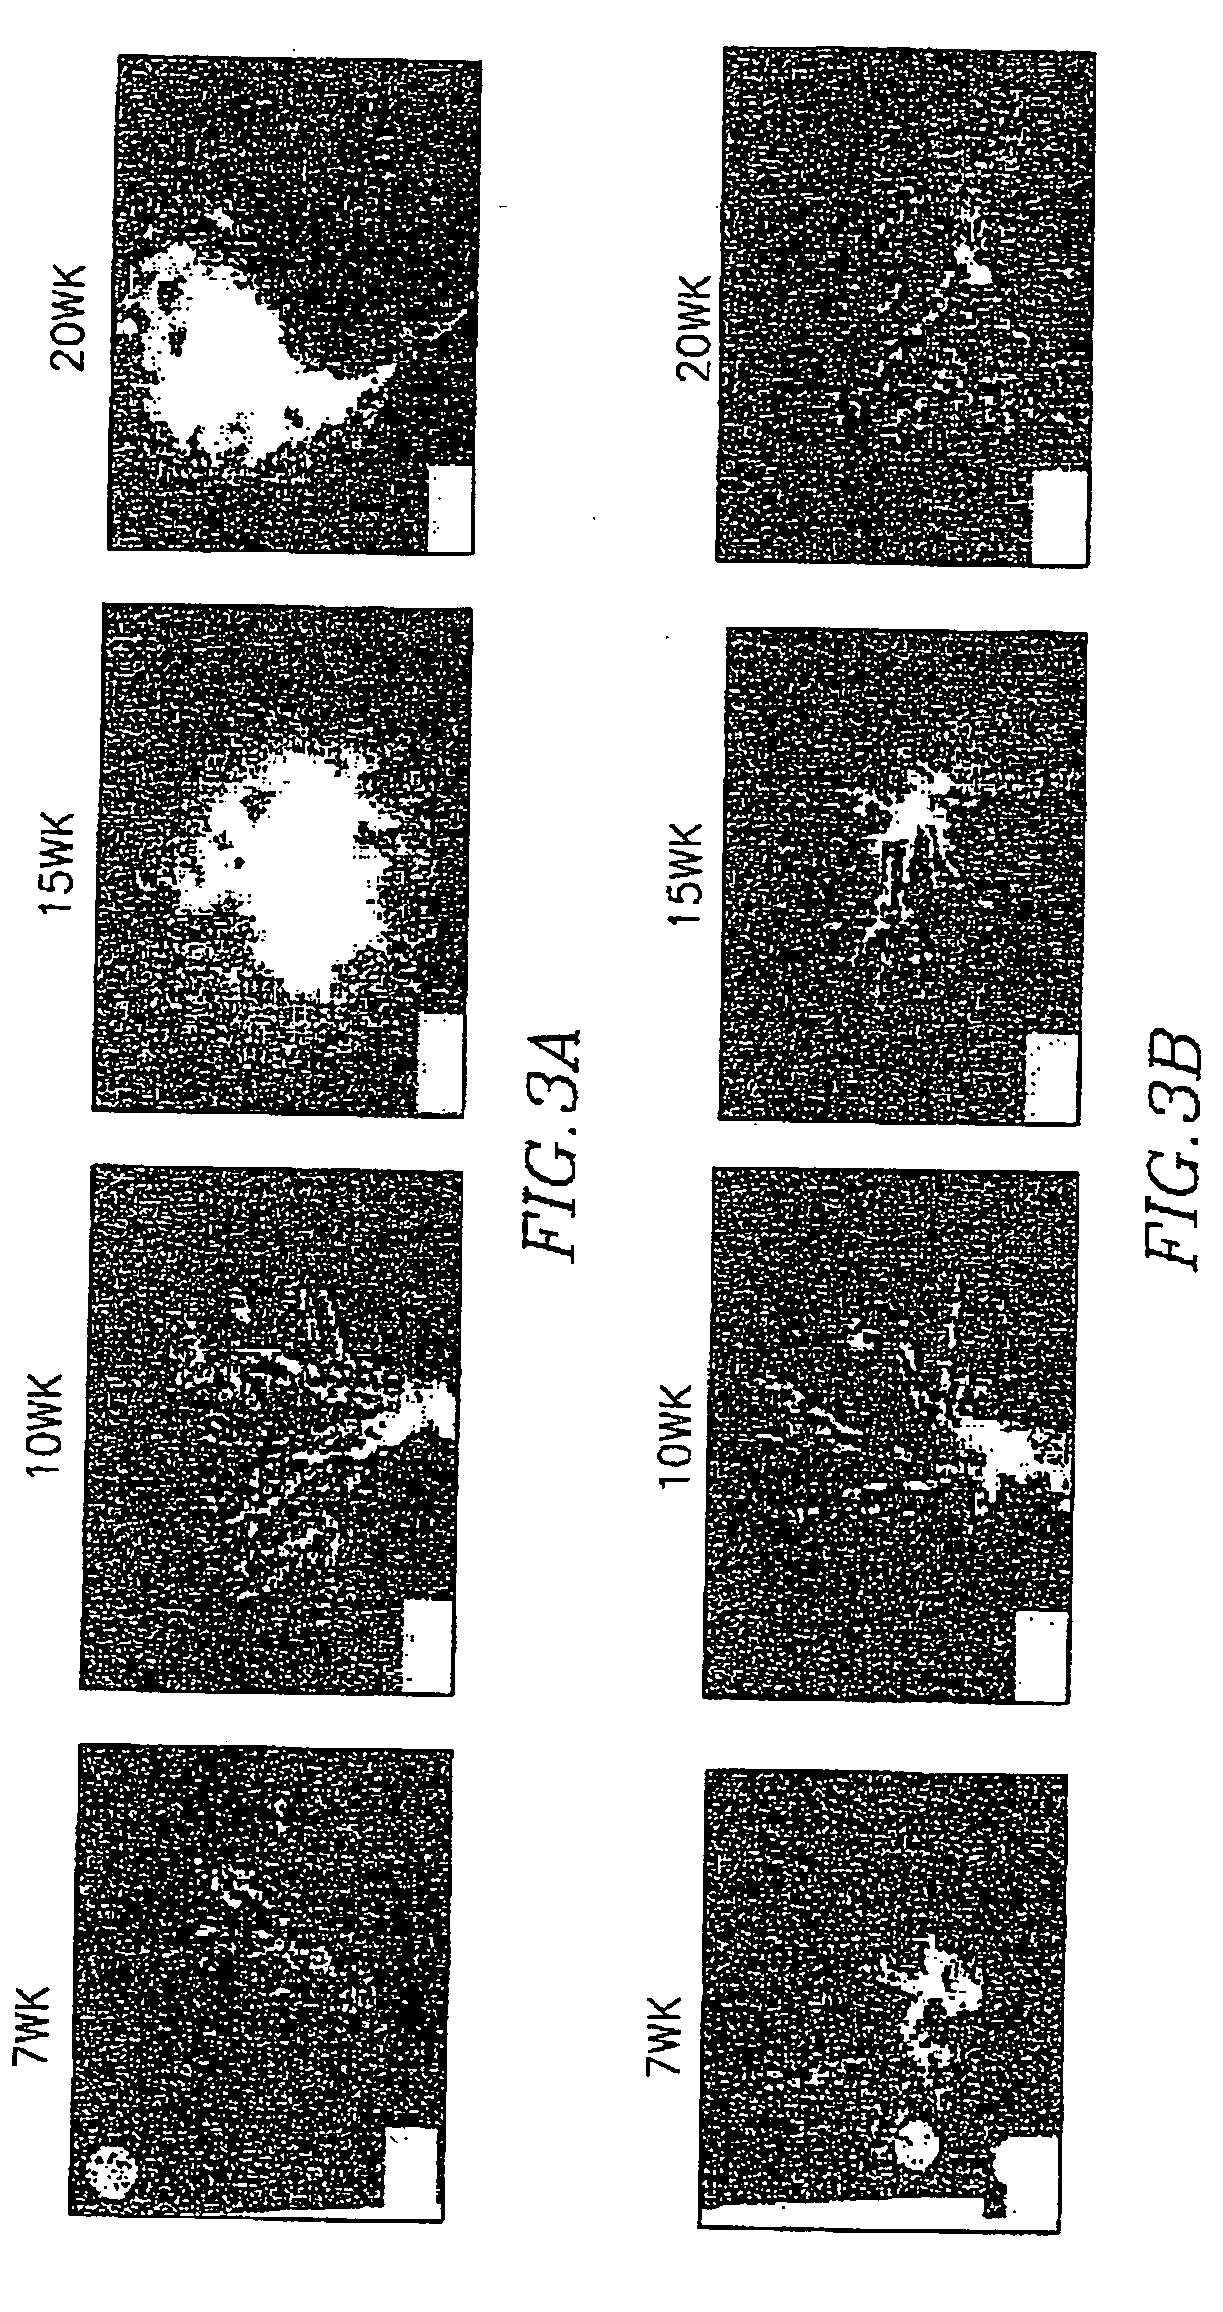 Method for treatment and chemoprevention of prostate cancer